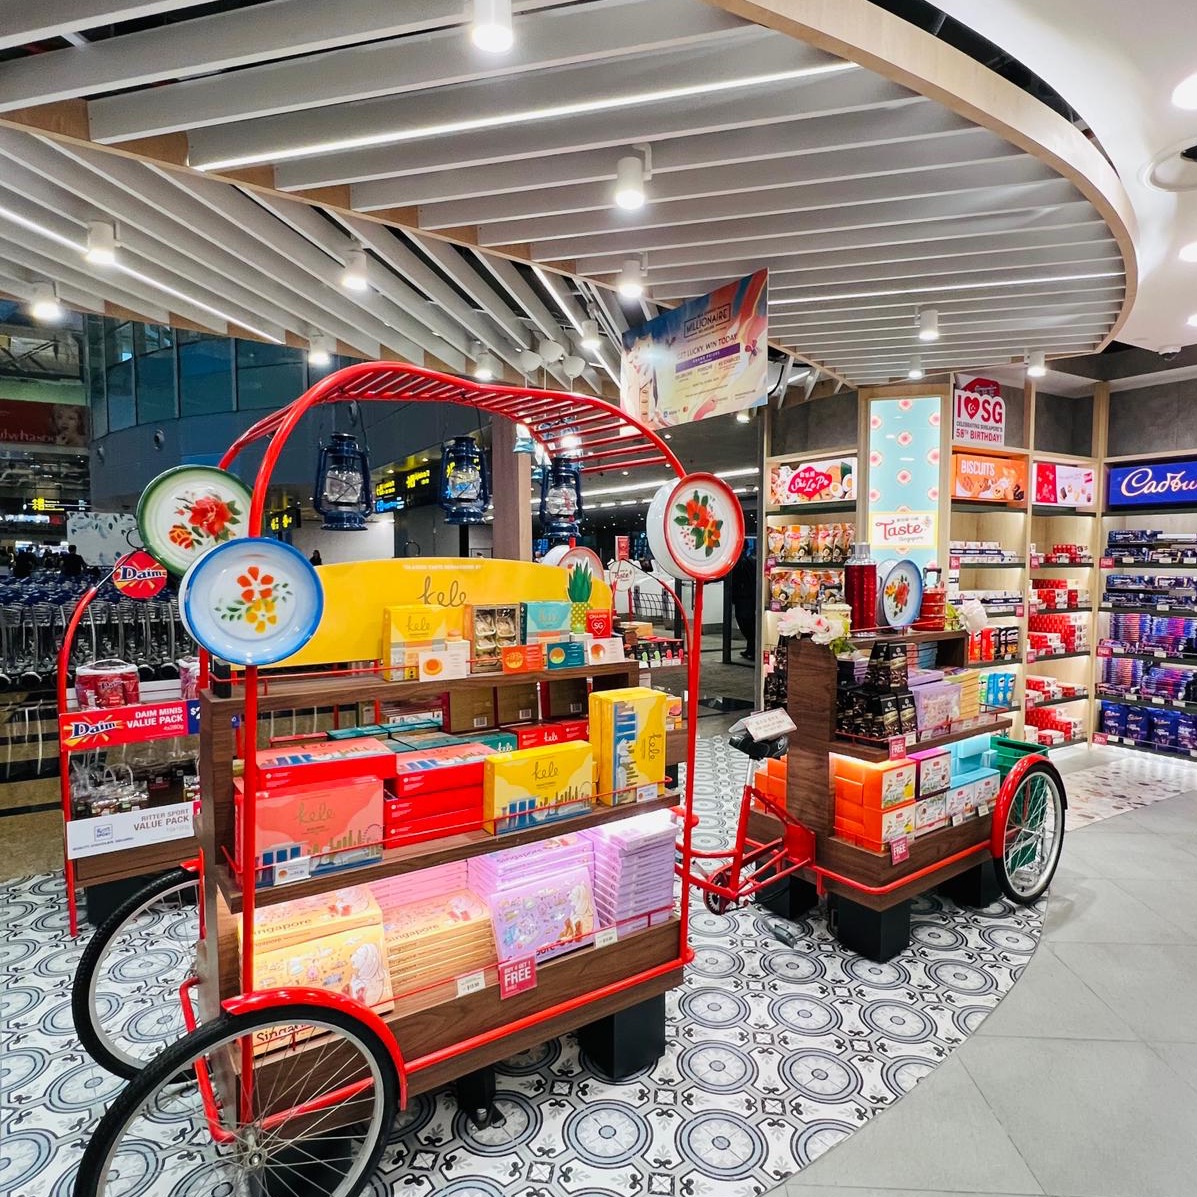 Free Cookie Pack in T Galleria by DFS, Singapore - Klook United